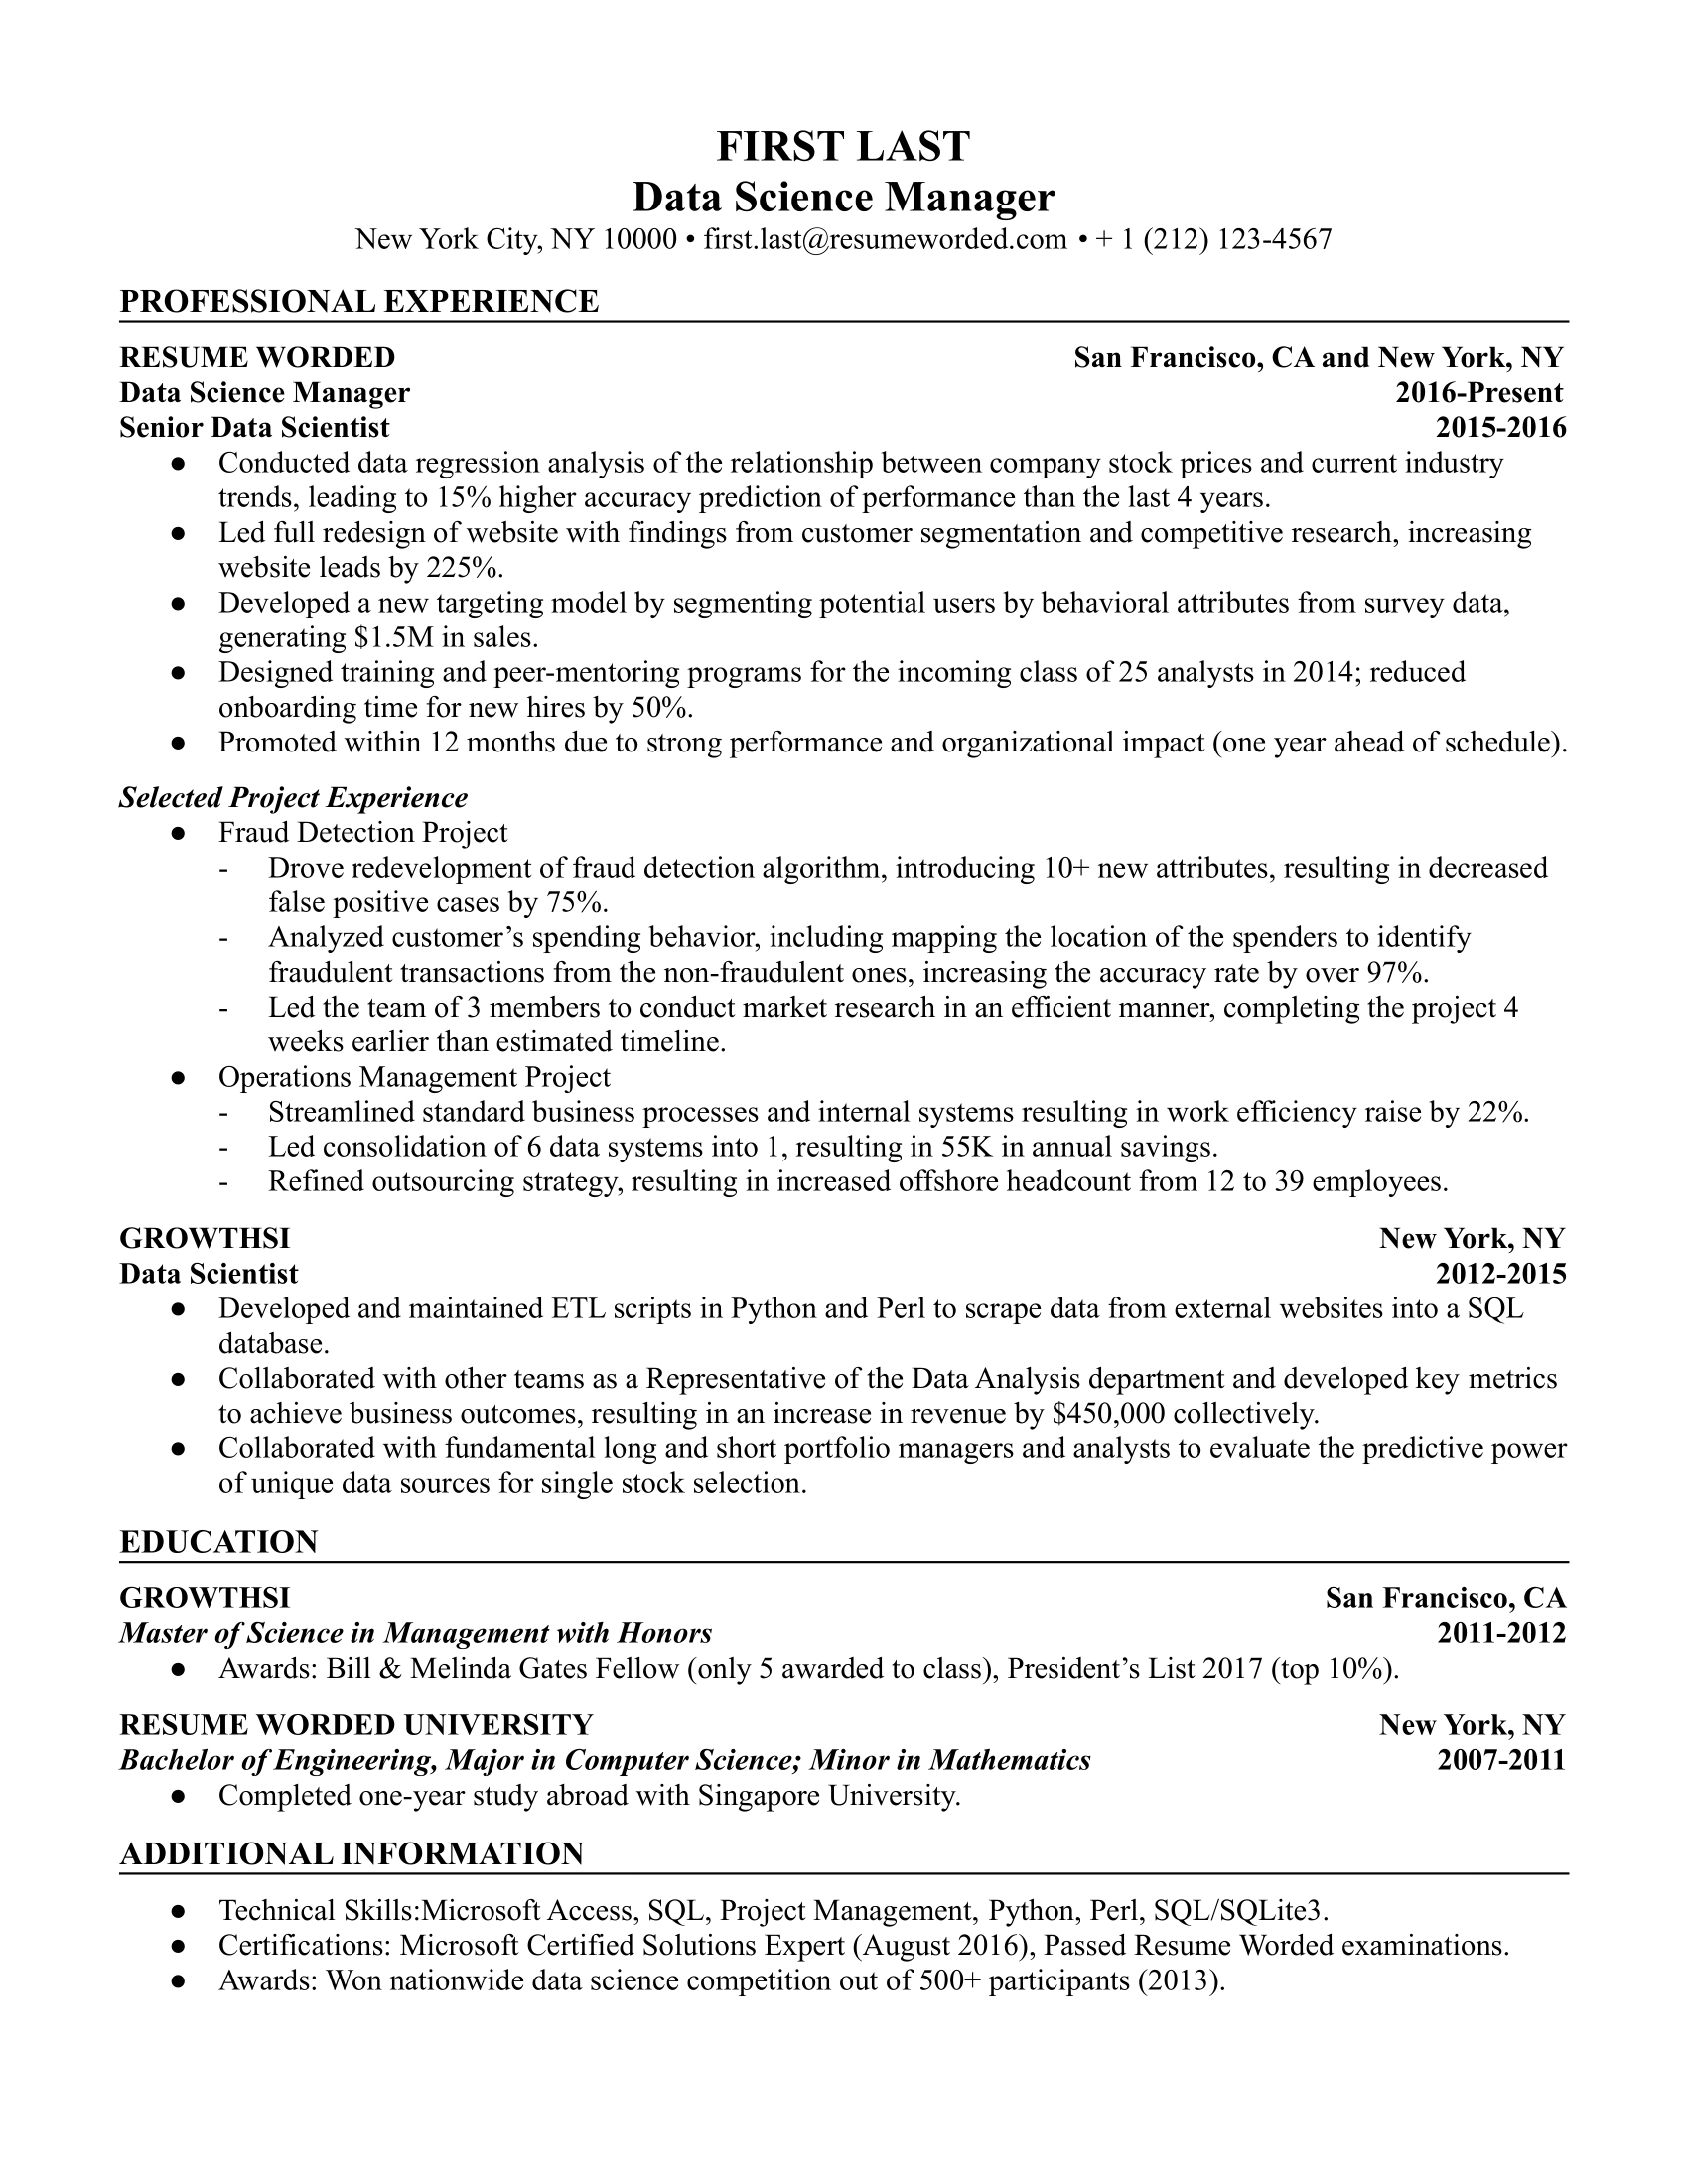 Data Science Manager Resume Sample